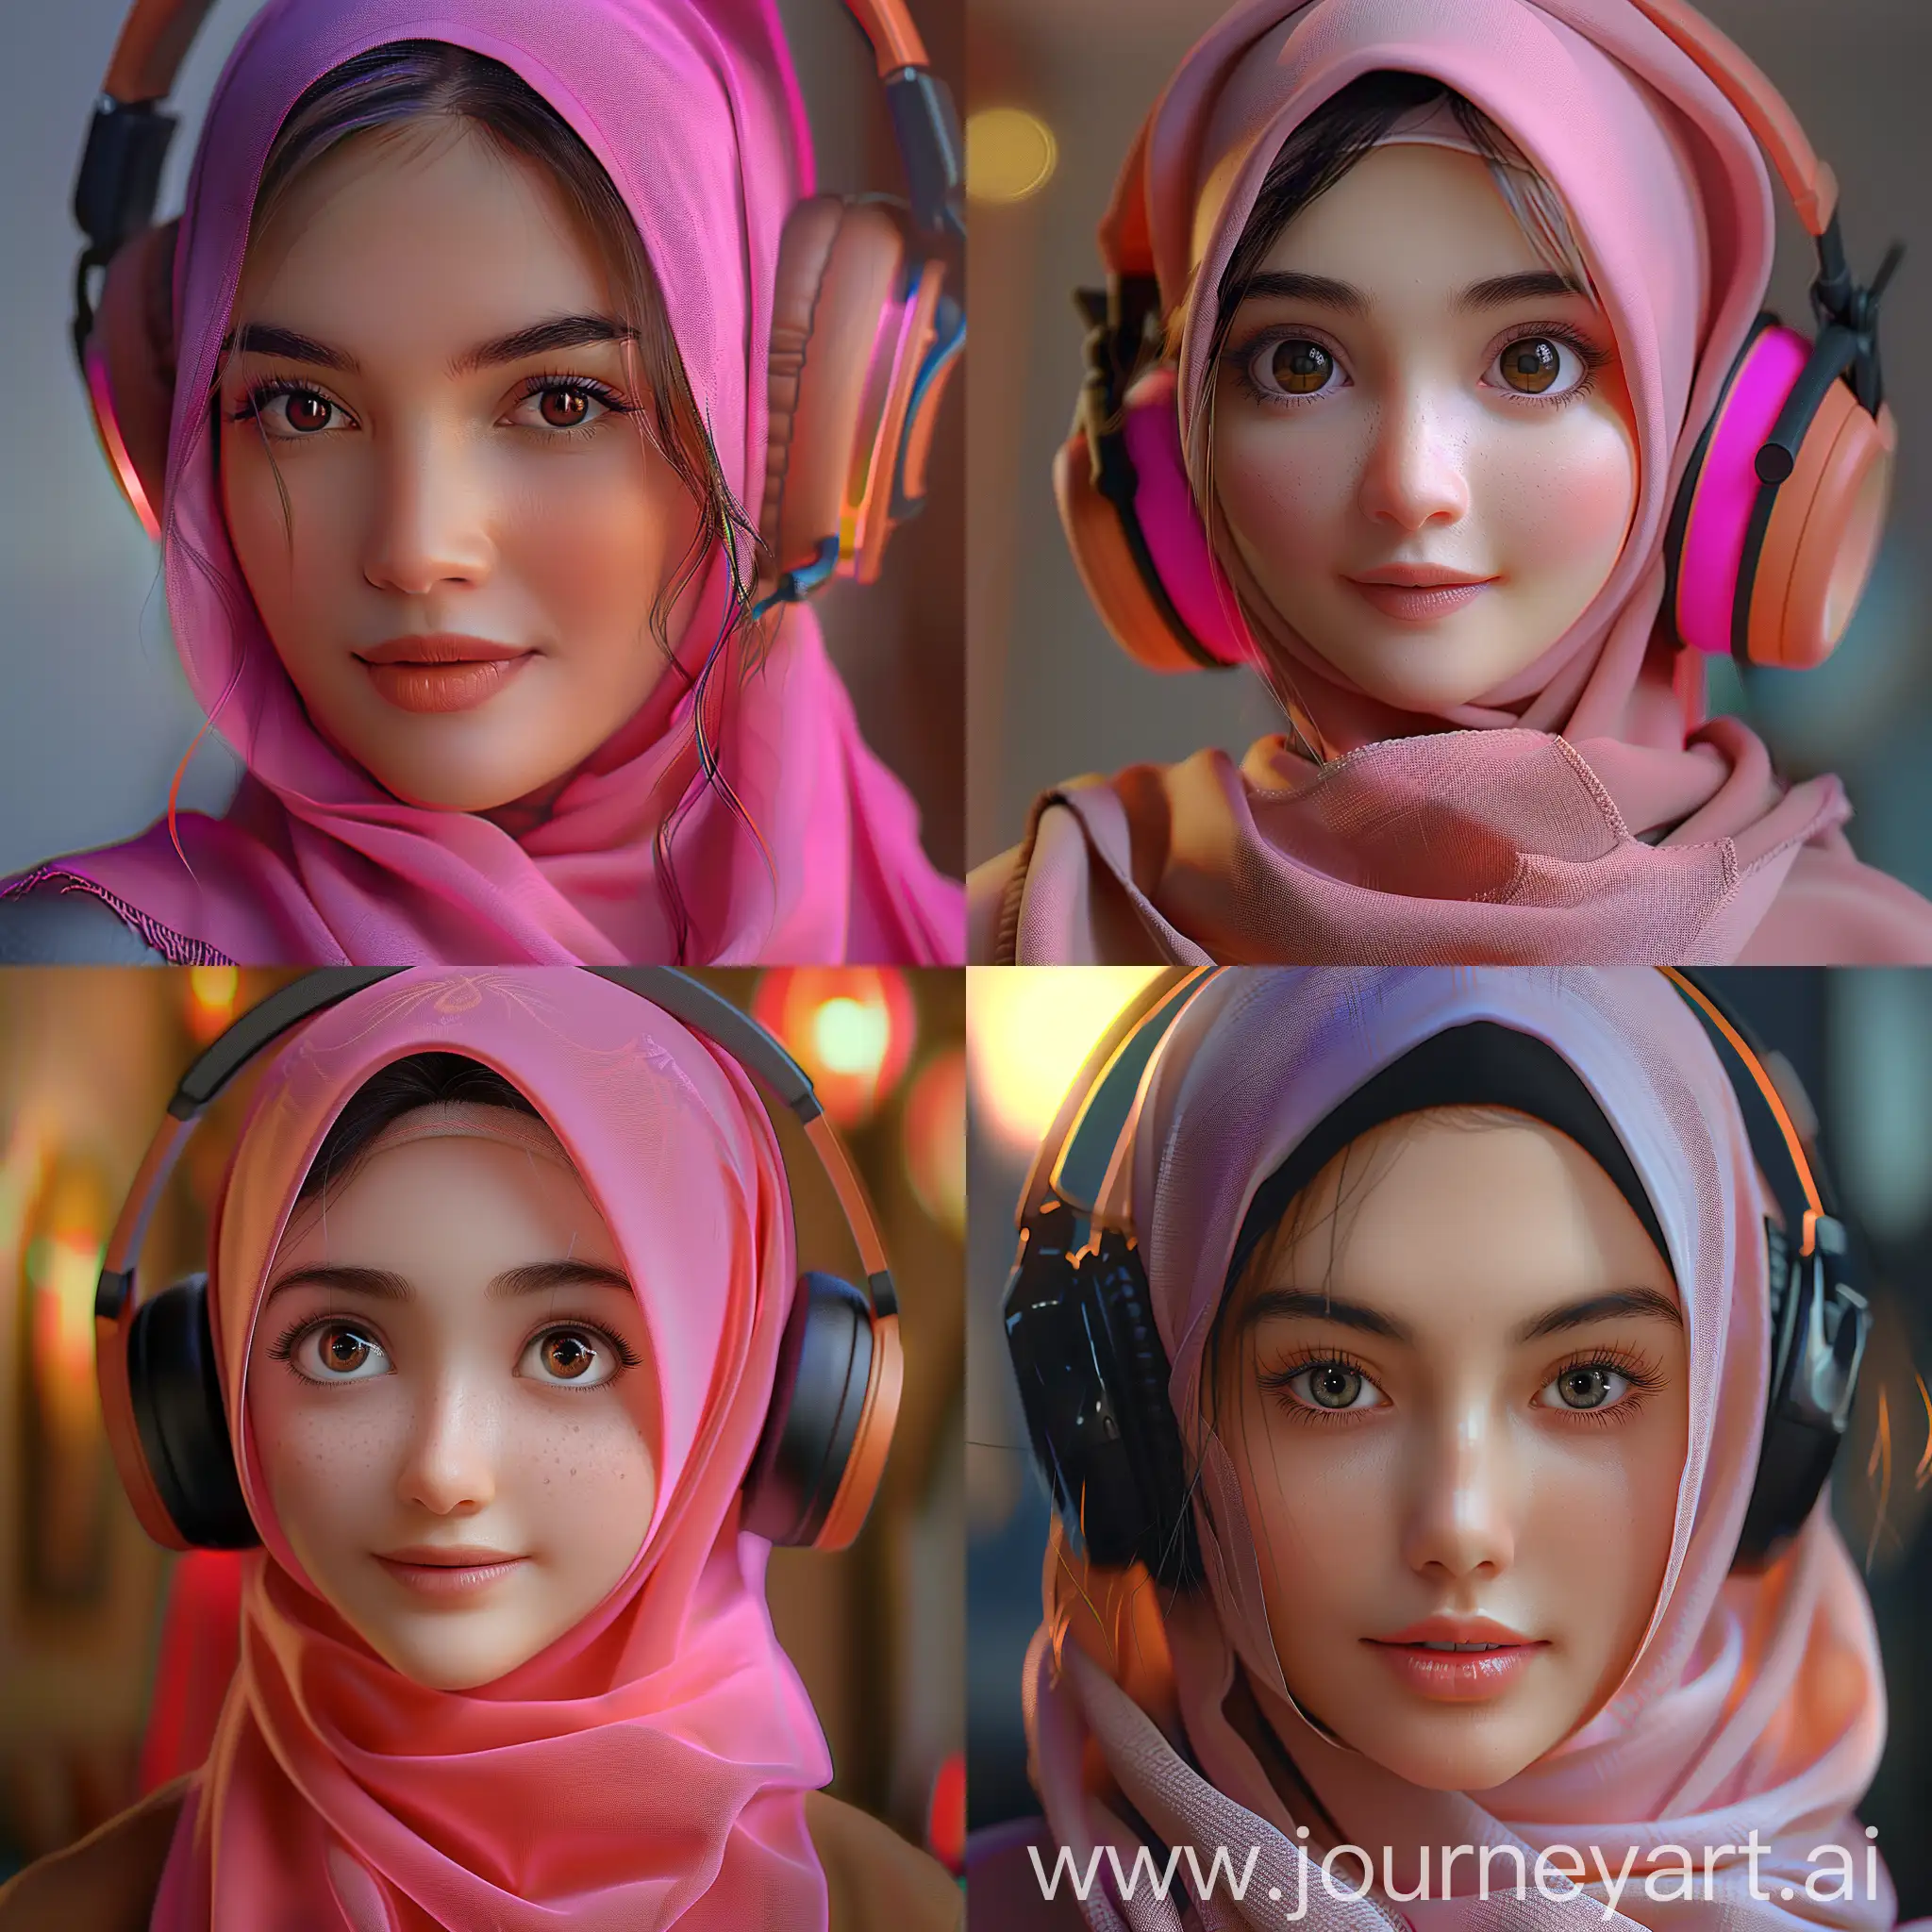 [ https://i.imgur.com/zQOP5IQ.jpeg ] Make an image that is exactly the same as this example. Please render in typical Disney pixar style, wear pink hijab, smiling into camera, sharp focus and detailed, 8k, hyper realistic, natural lighting, minimalist background. --s 500